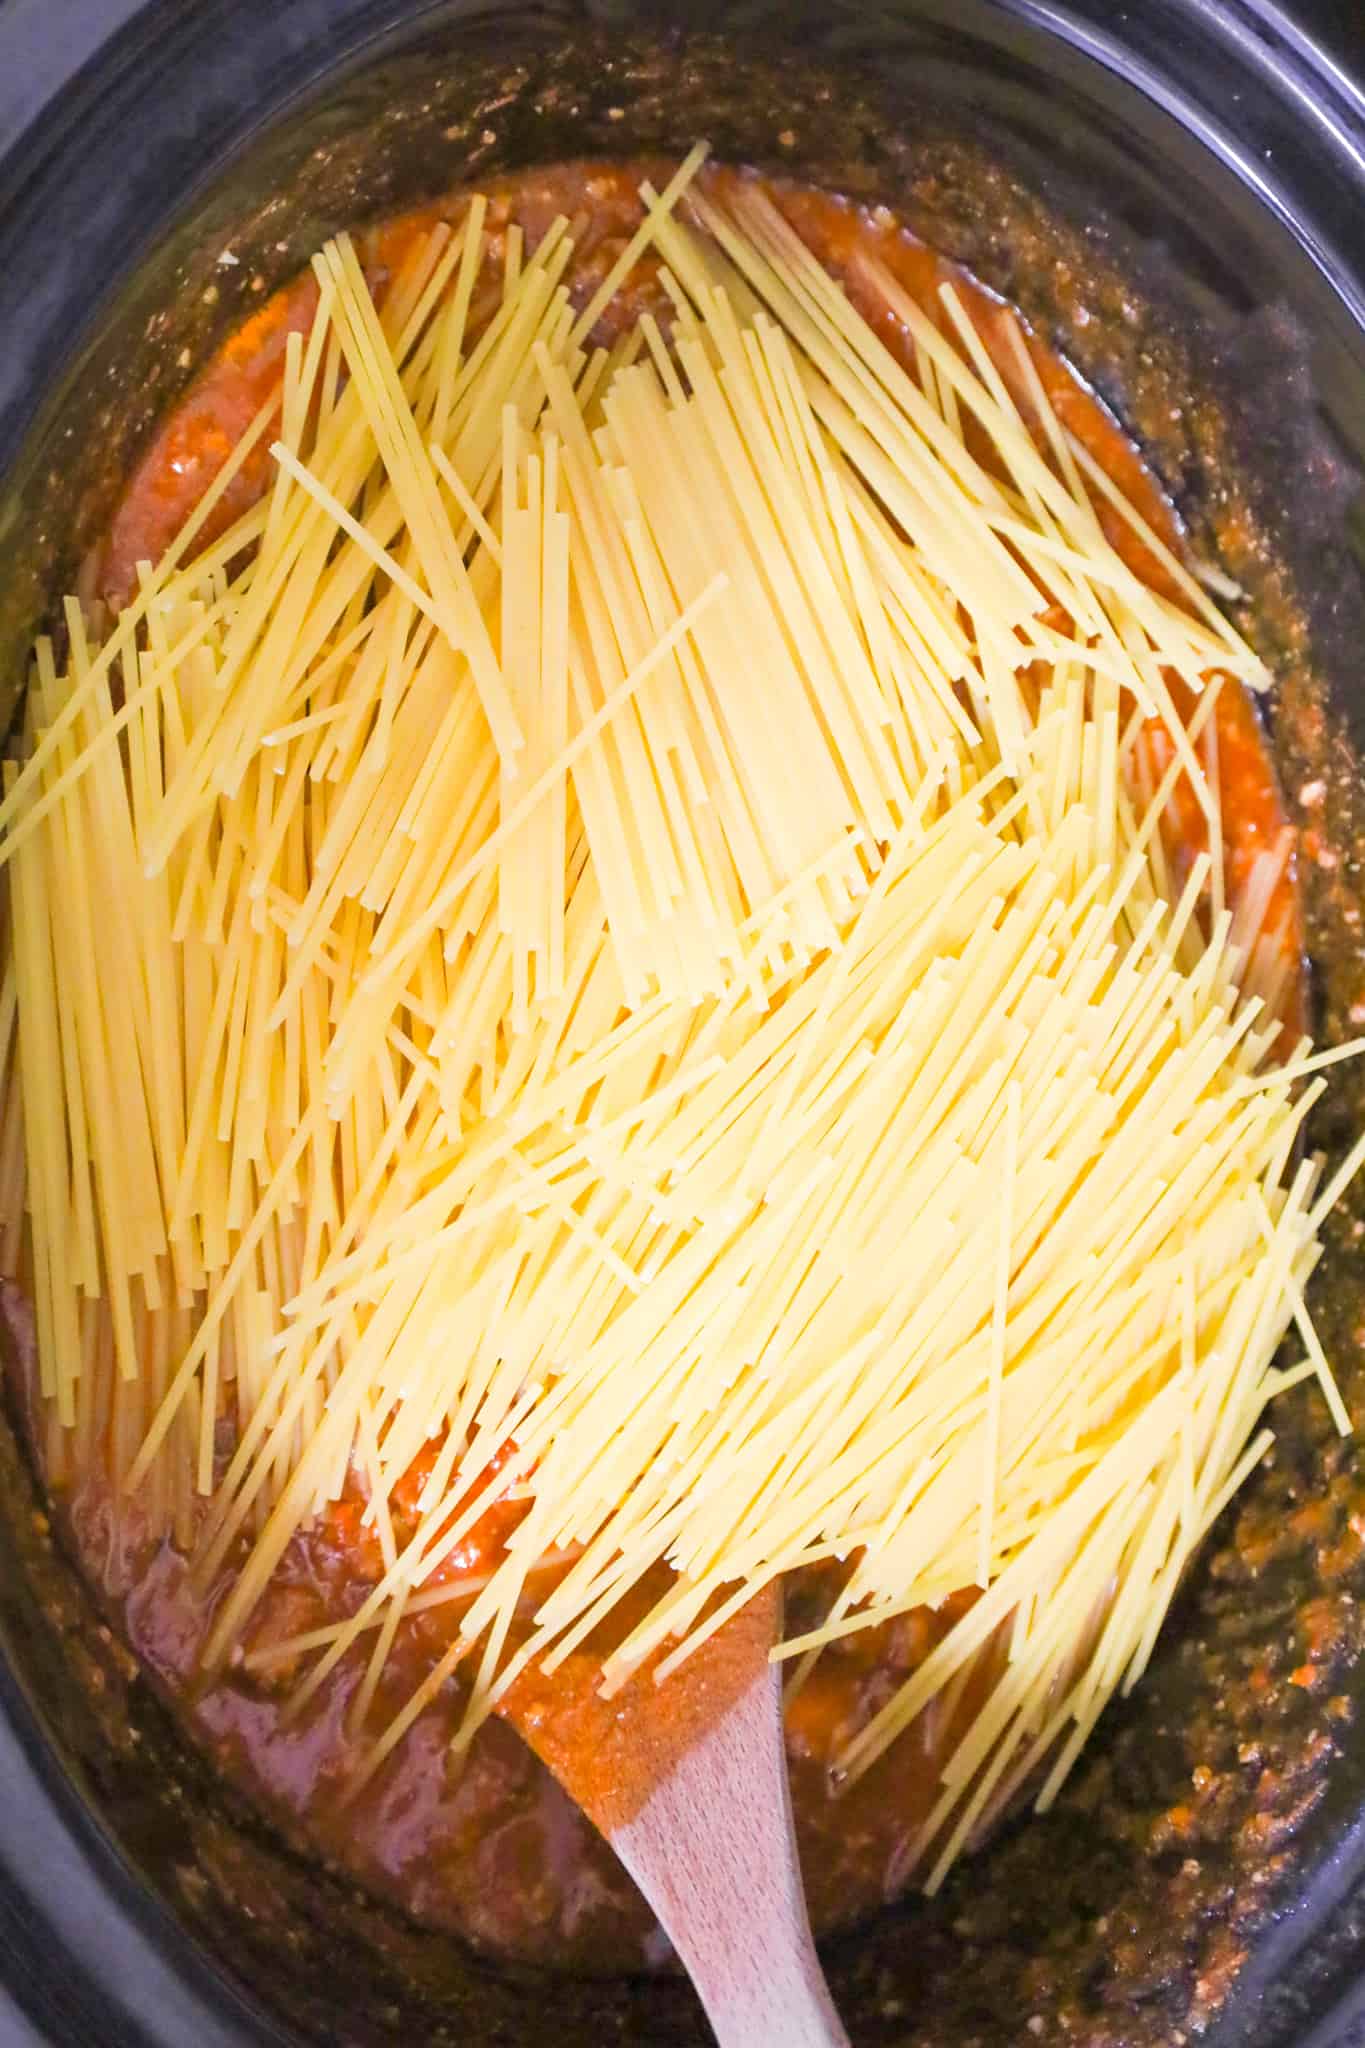 uncooked spaghetti noodles mixed into meat sauce in a crock pot